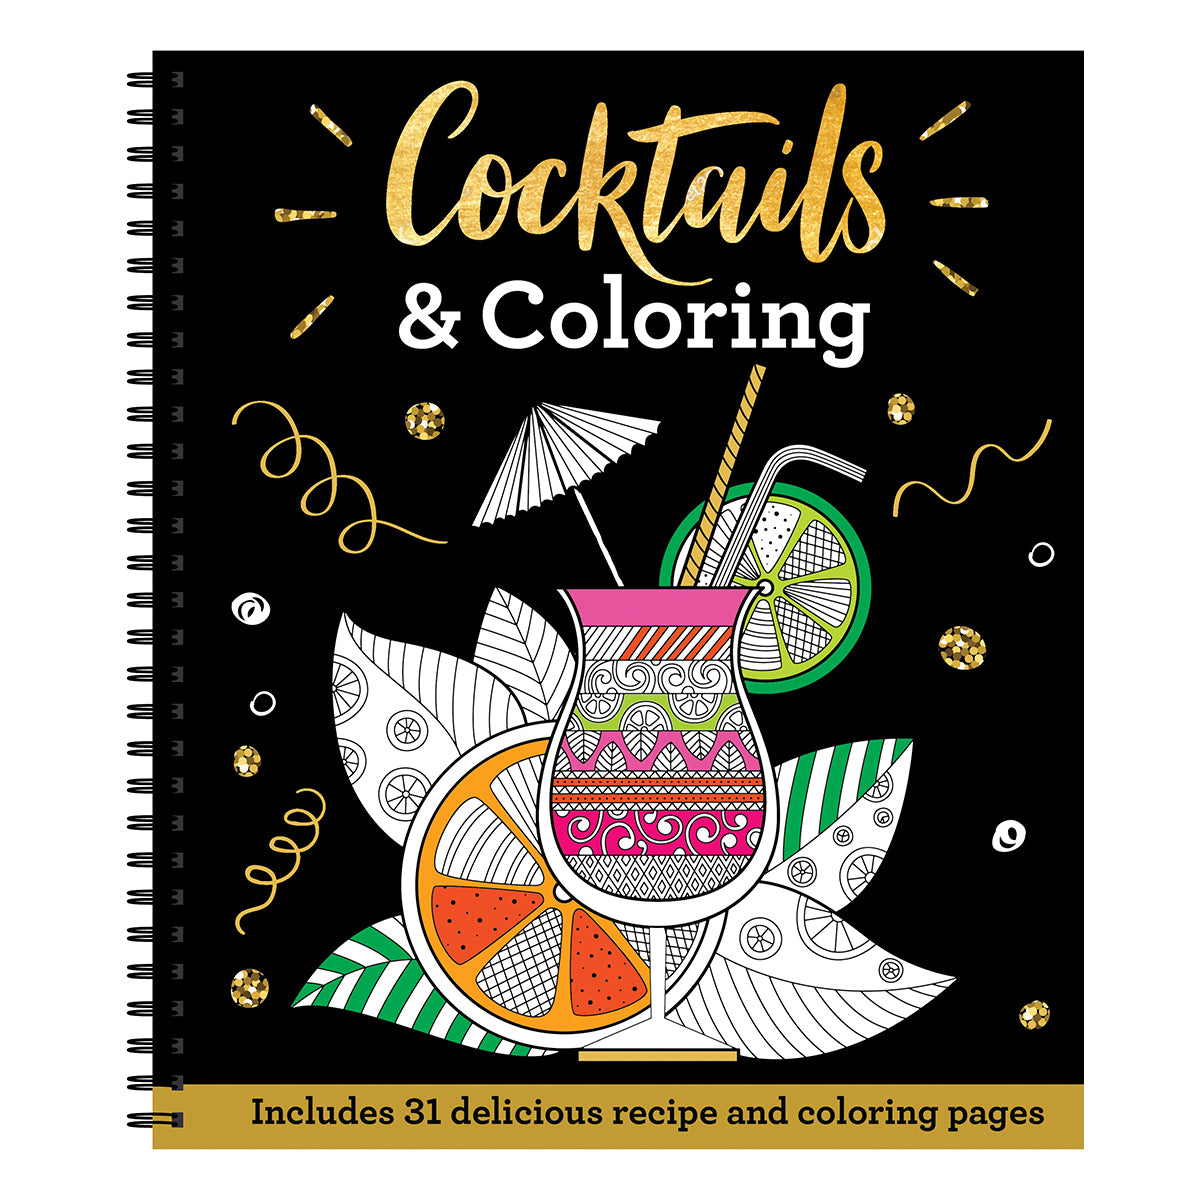 Cocktails & Coloring